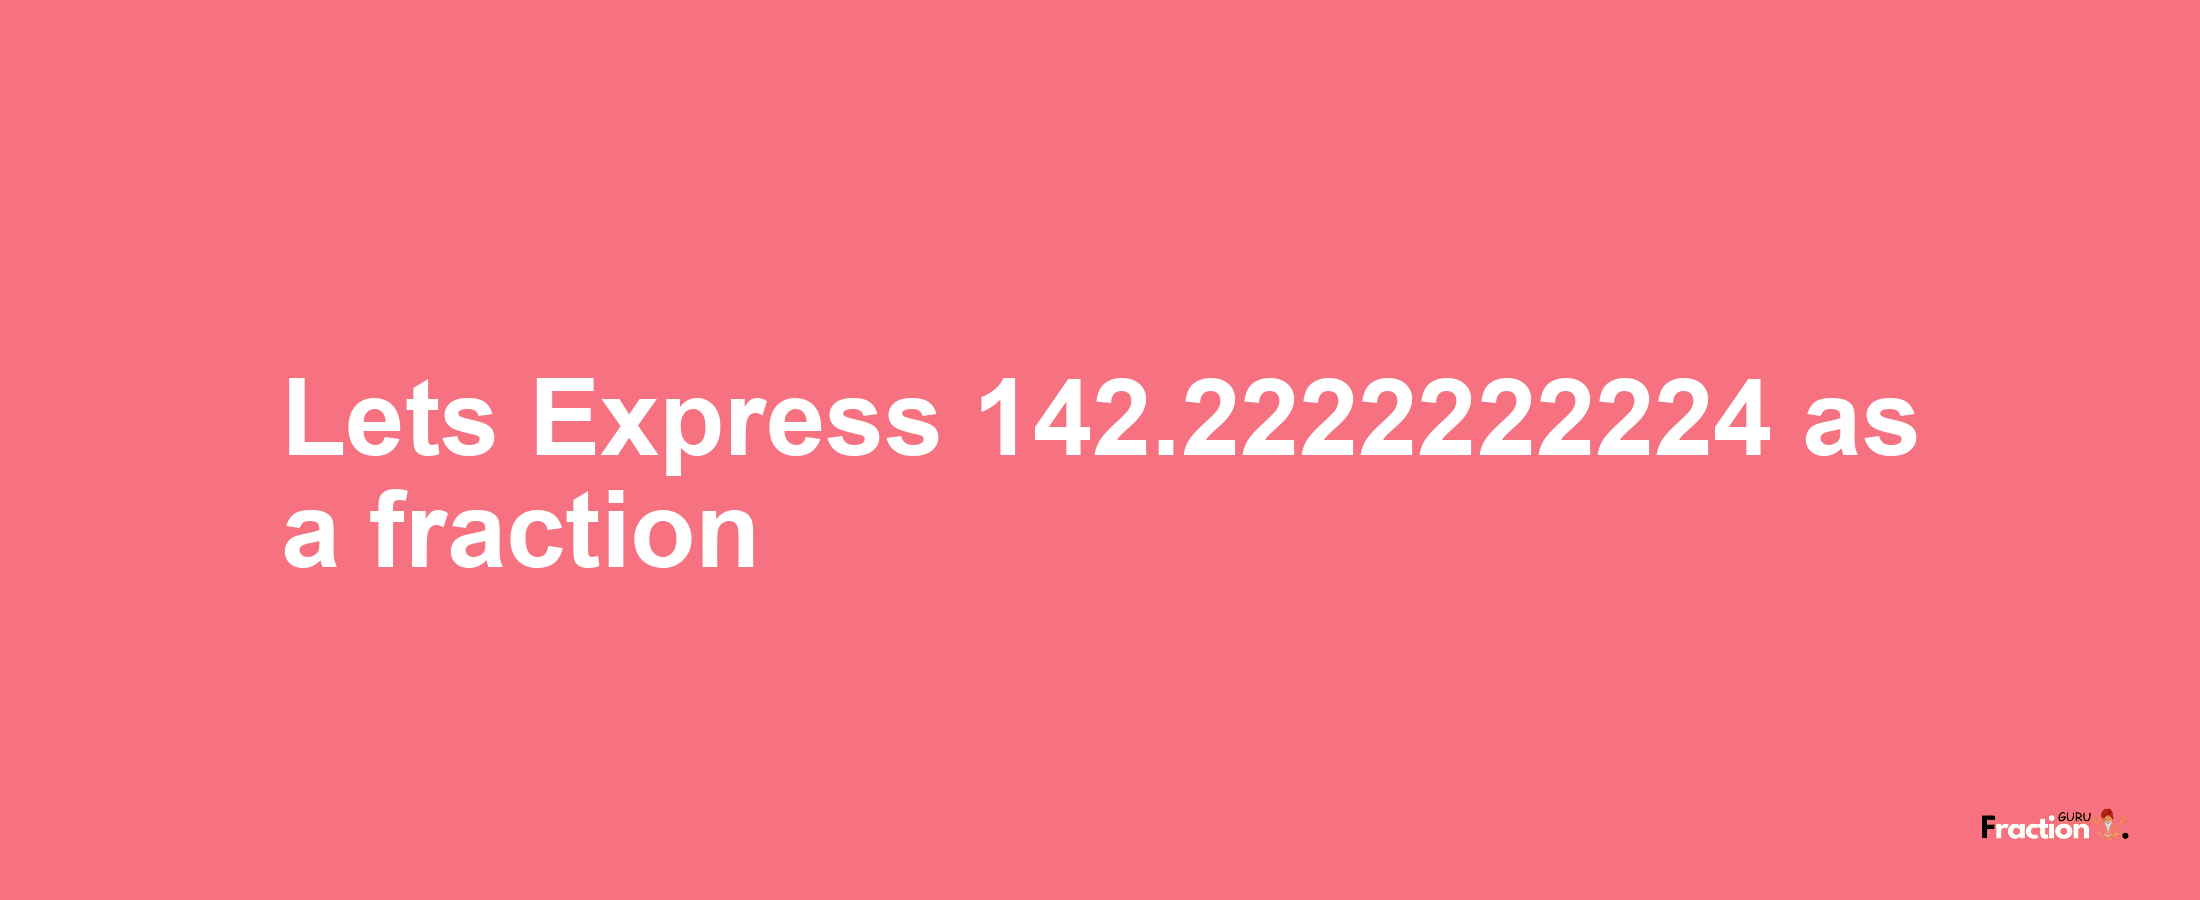 Lets Express 142.2222222224 as afraction